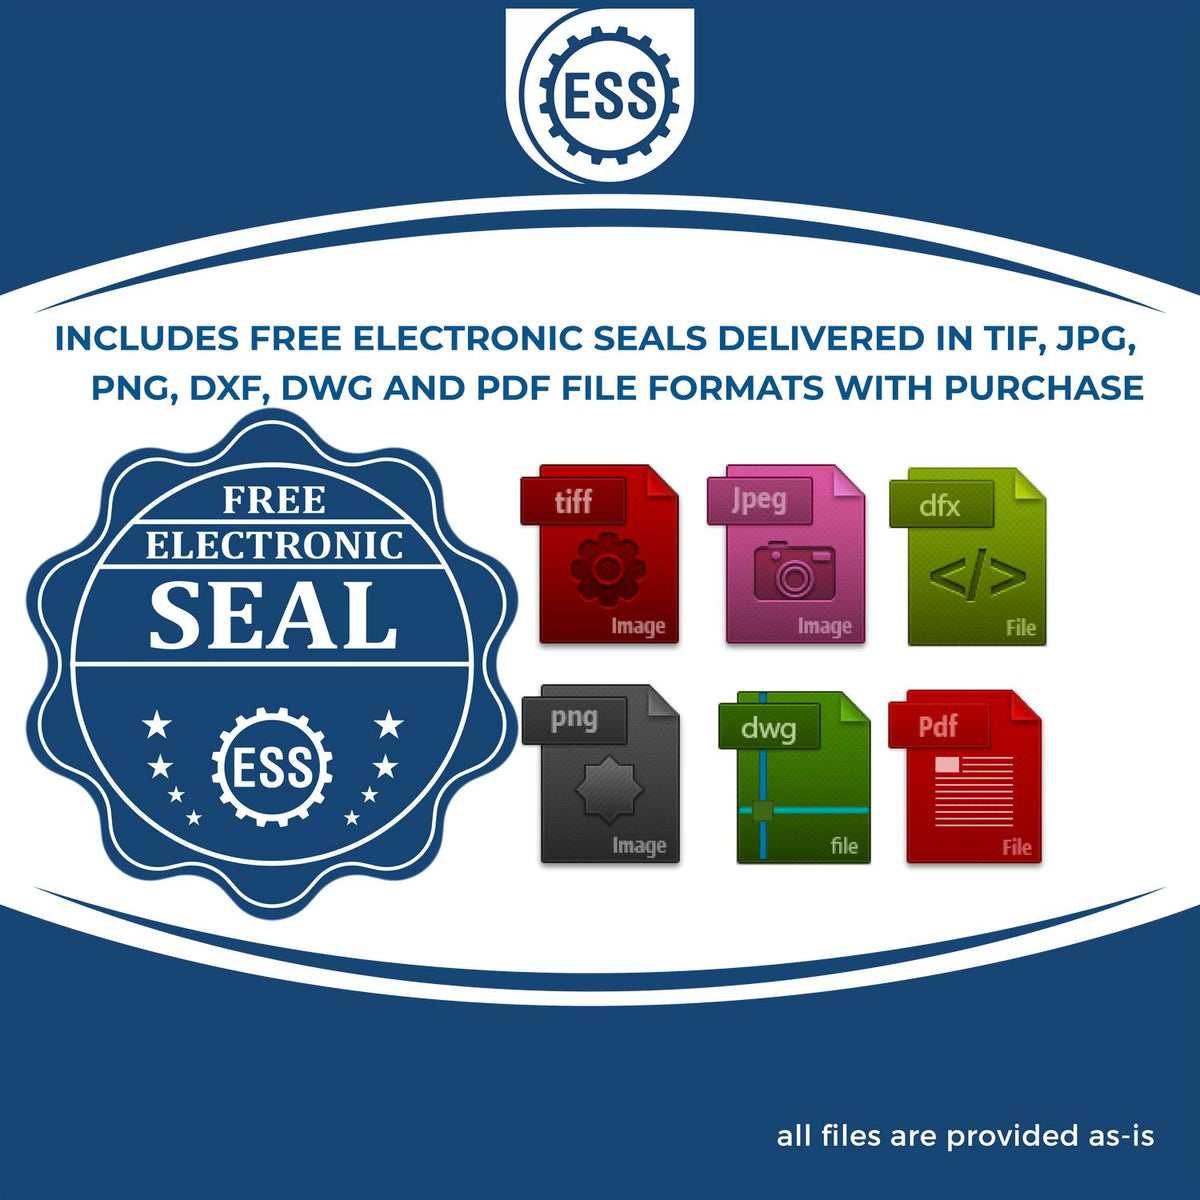 An infographic for the free electronic seal for the Premium MaxLight Pre-Inked Georgia Engineering Stamp illustrating the different file type icons such as DXF, DWG, TIF, JPG and PNG.